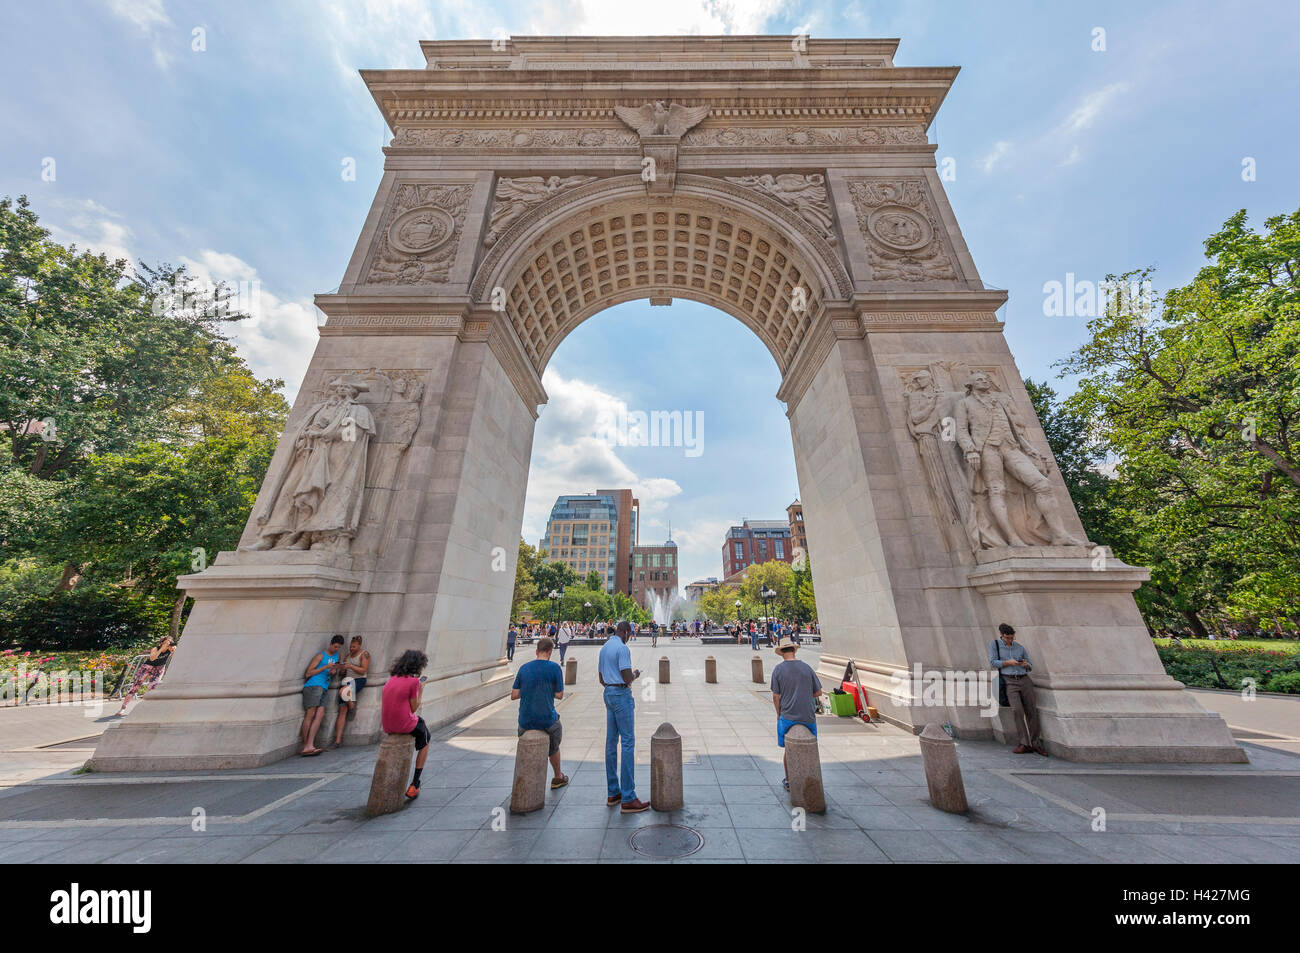 People standing by Washington Square Park Arch in New York City. Stock Photo